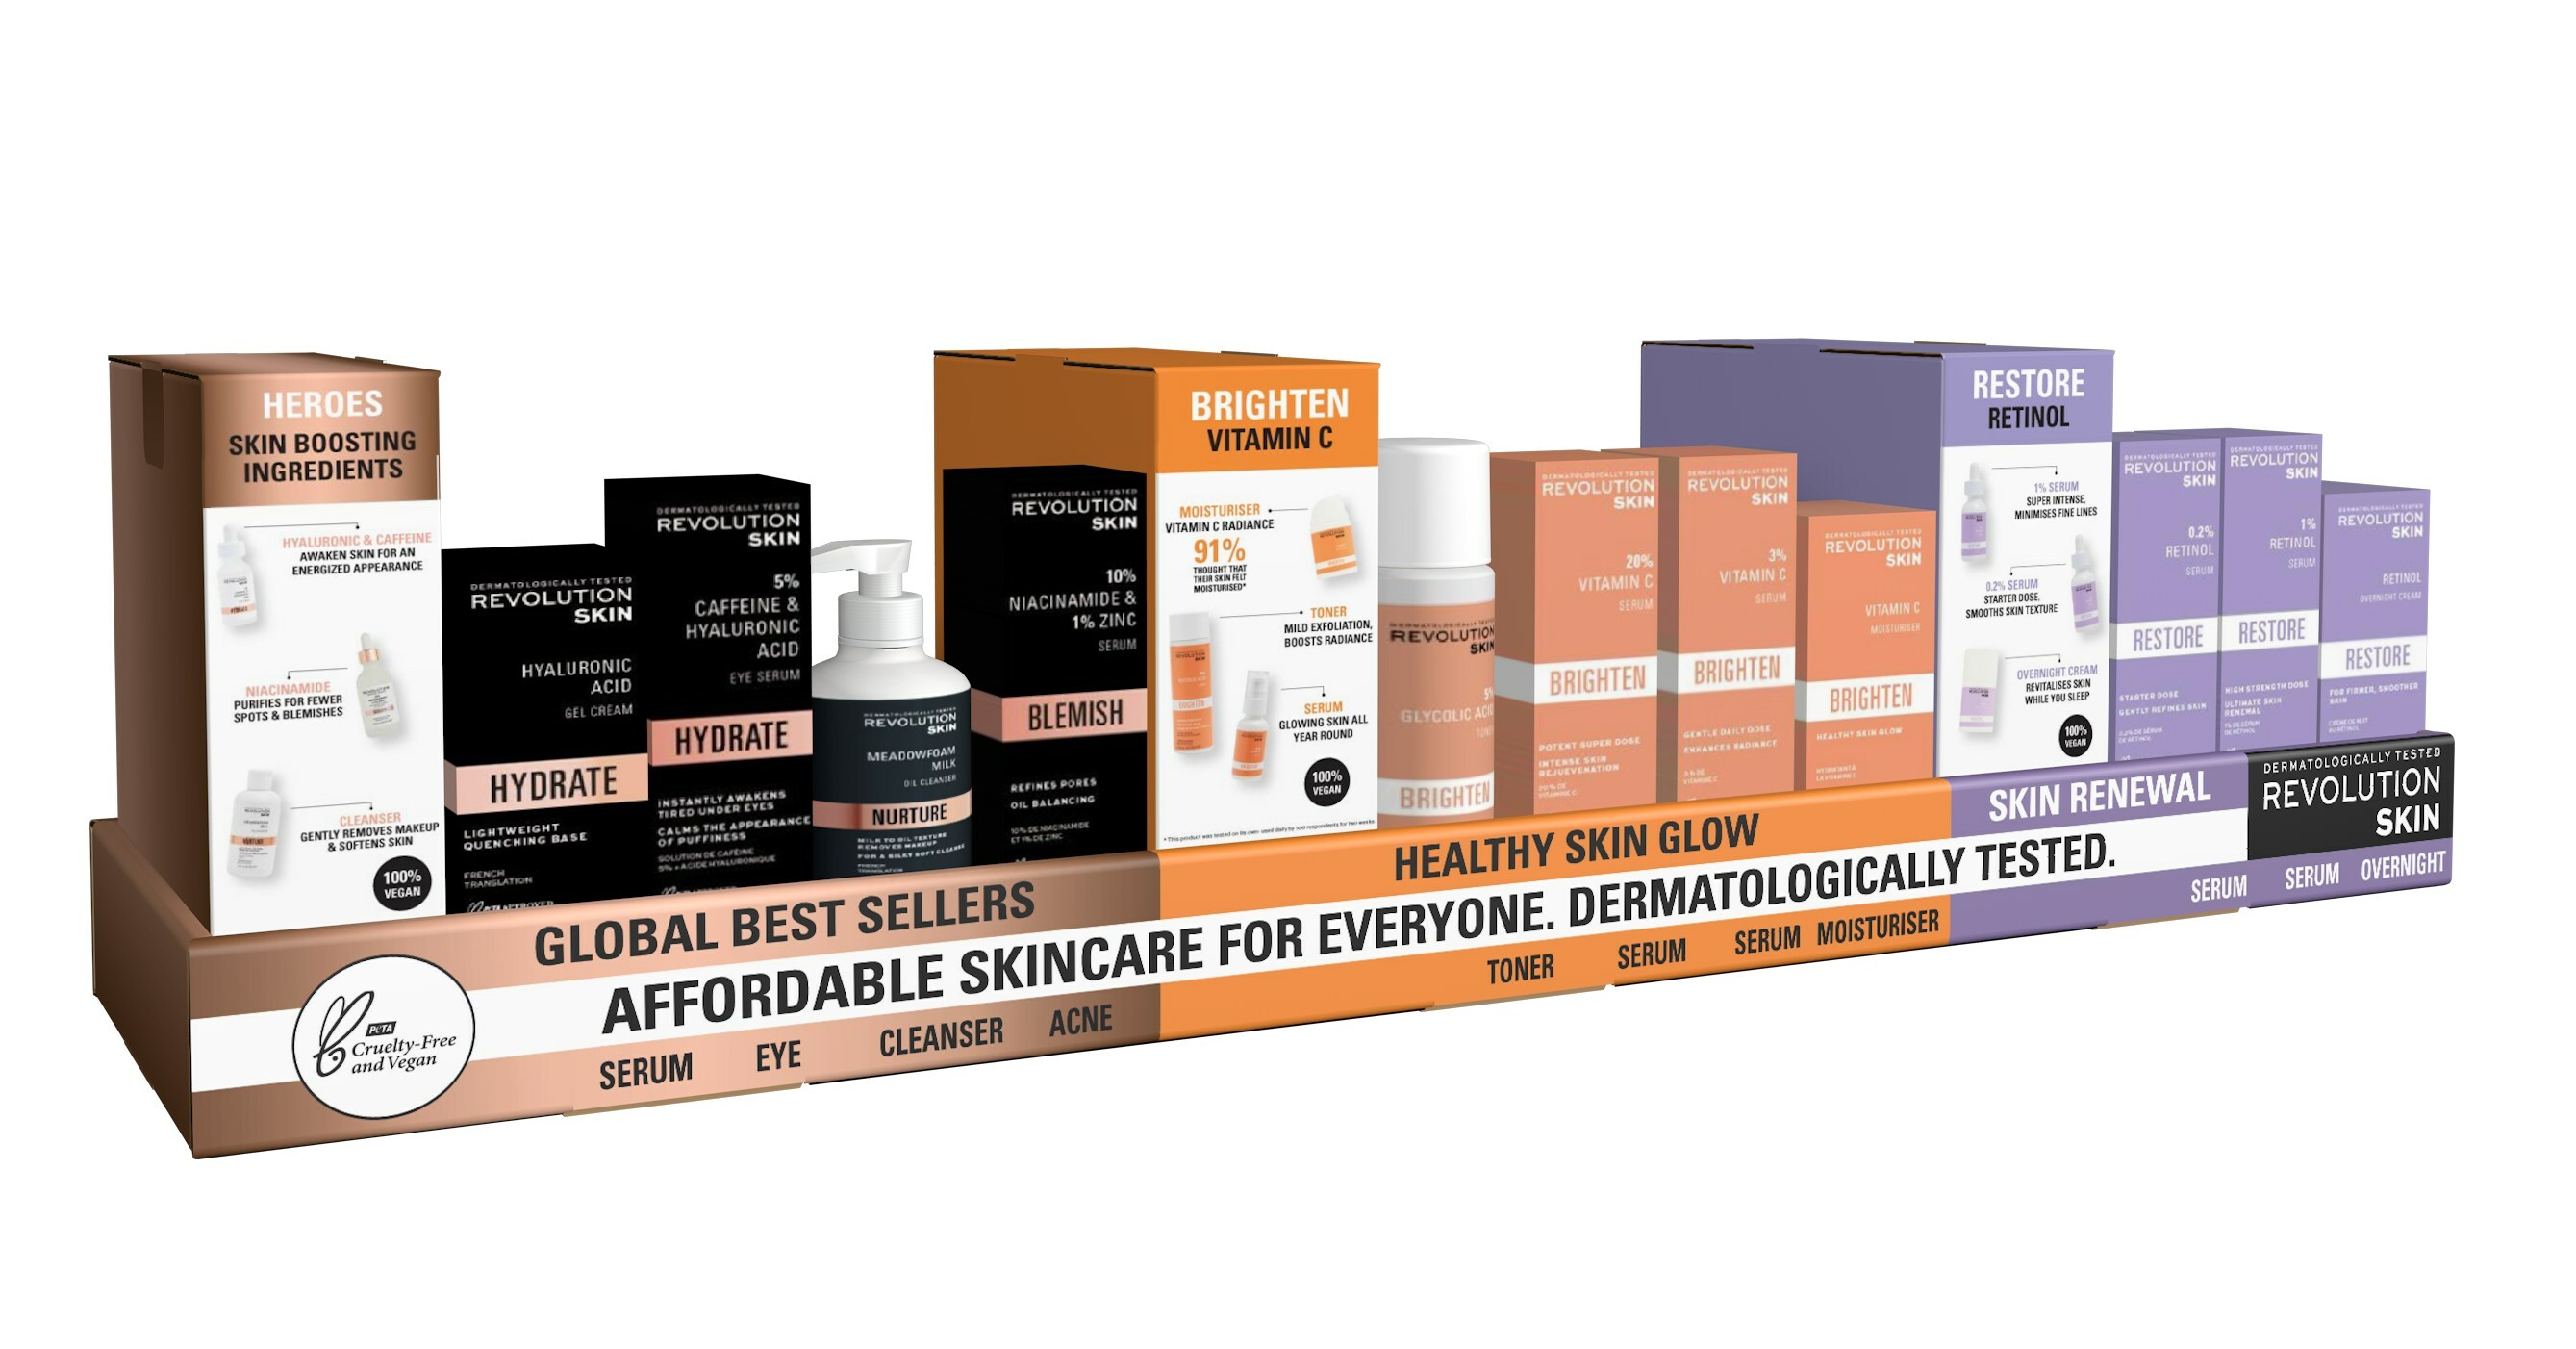 Revolution Pro's Miracle Skincare range is £200 cheaper than